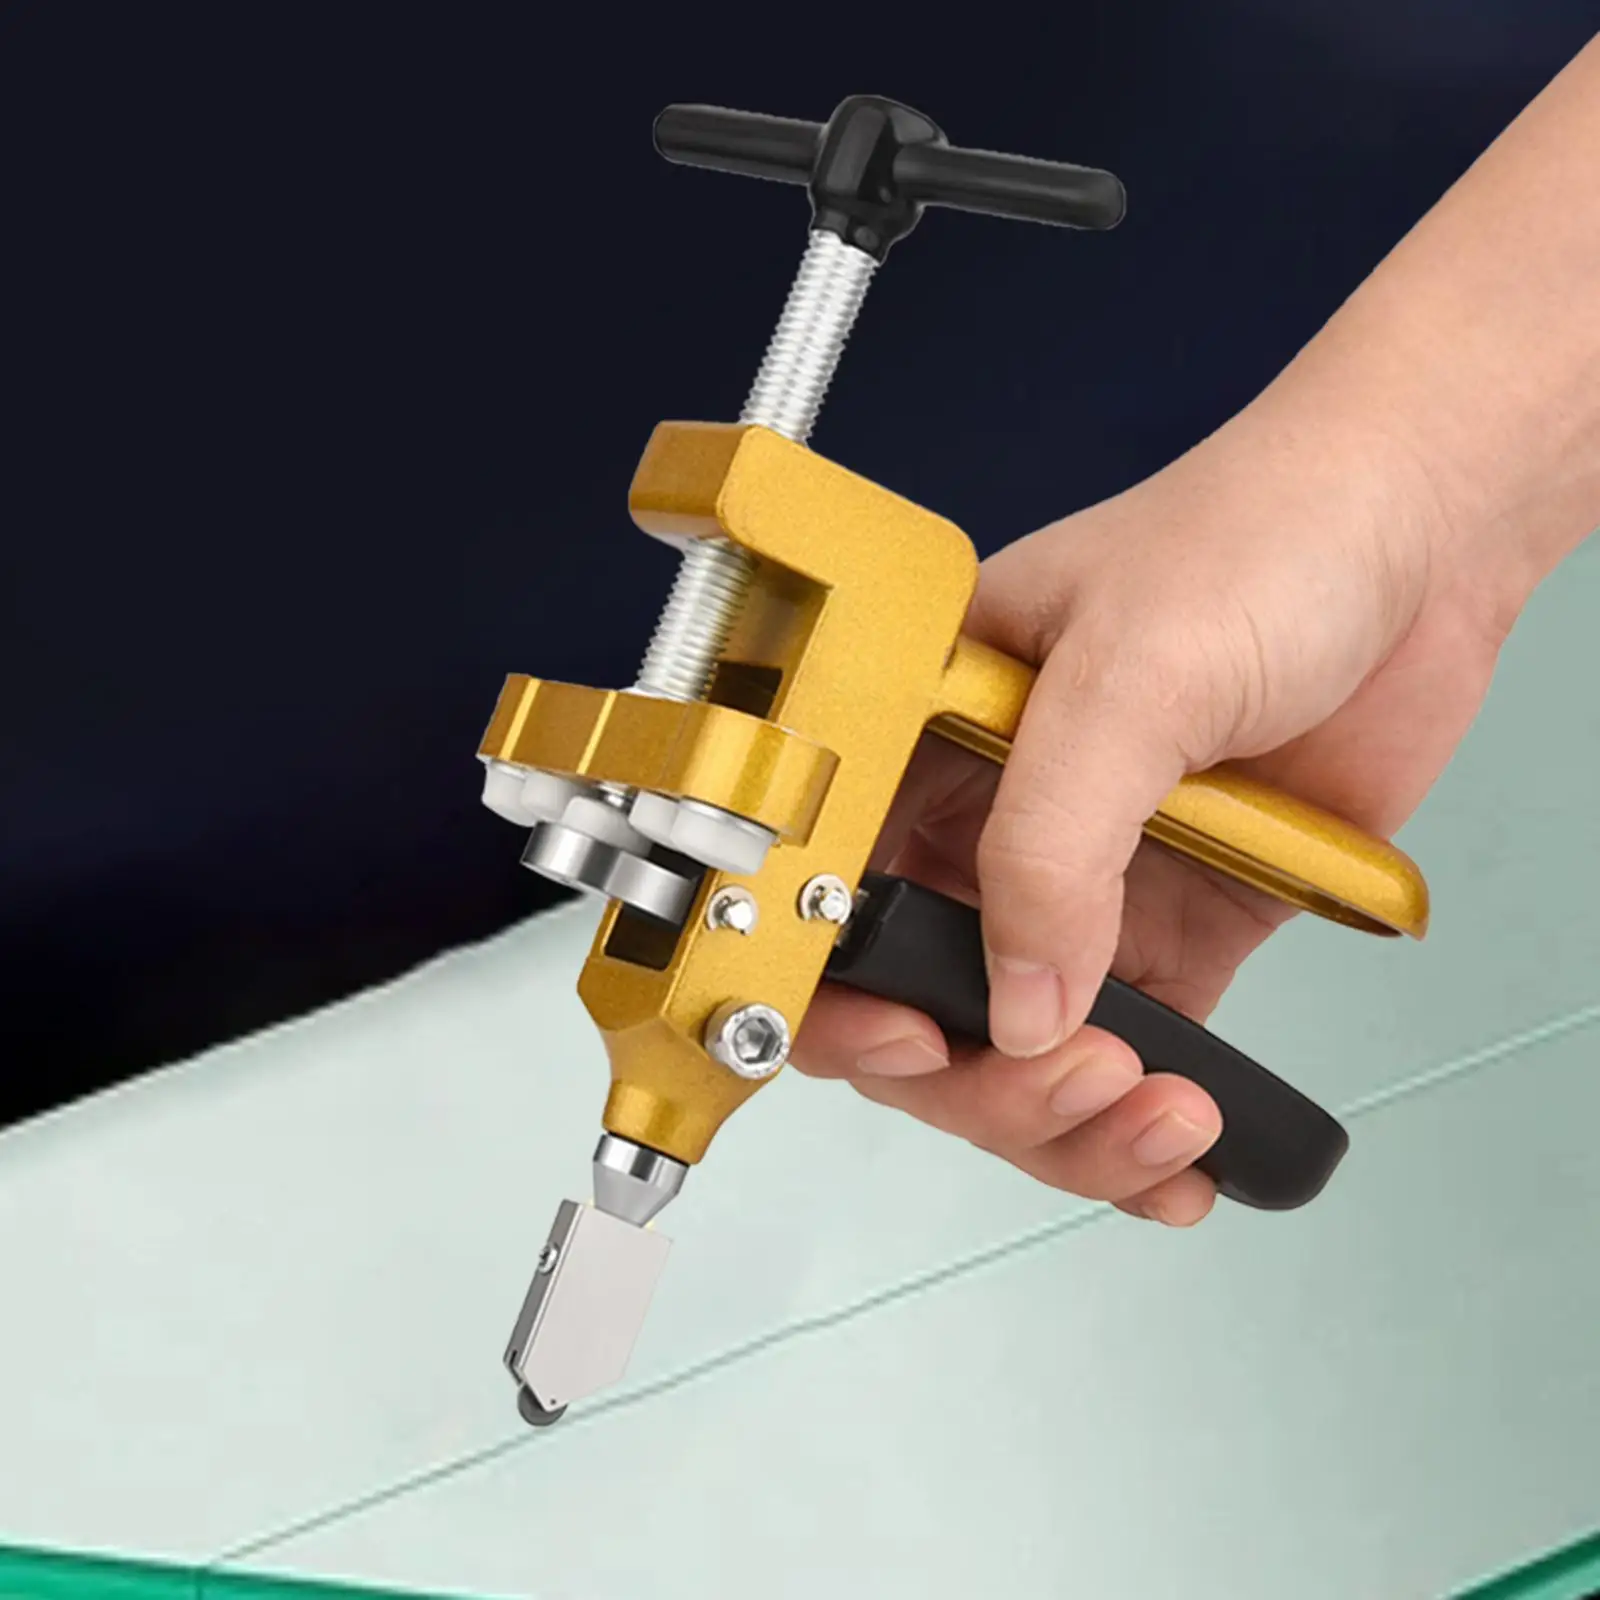 Glass Cutting Tool Multifunctional Portable Comfortable Gripping Manual Tile Cutter Tool Glass Tile Cutter Breaker Glass Cutter